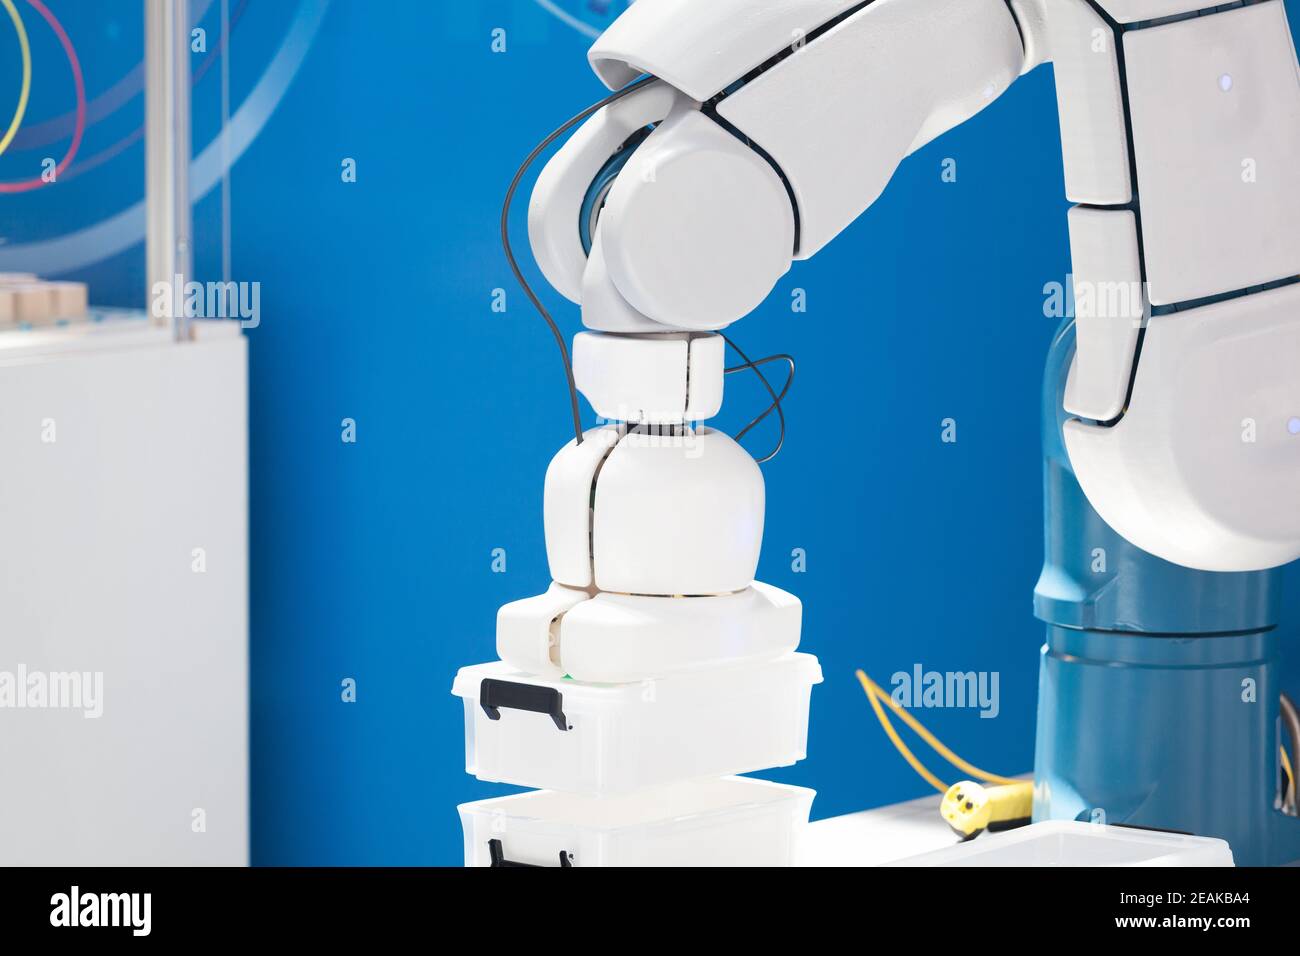 Industrial pick and place robot arm Stock Photo